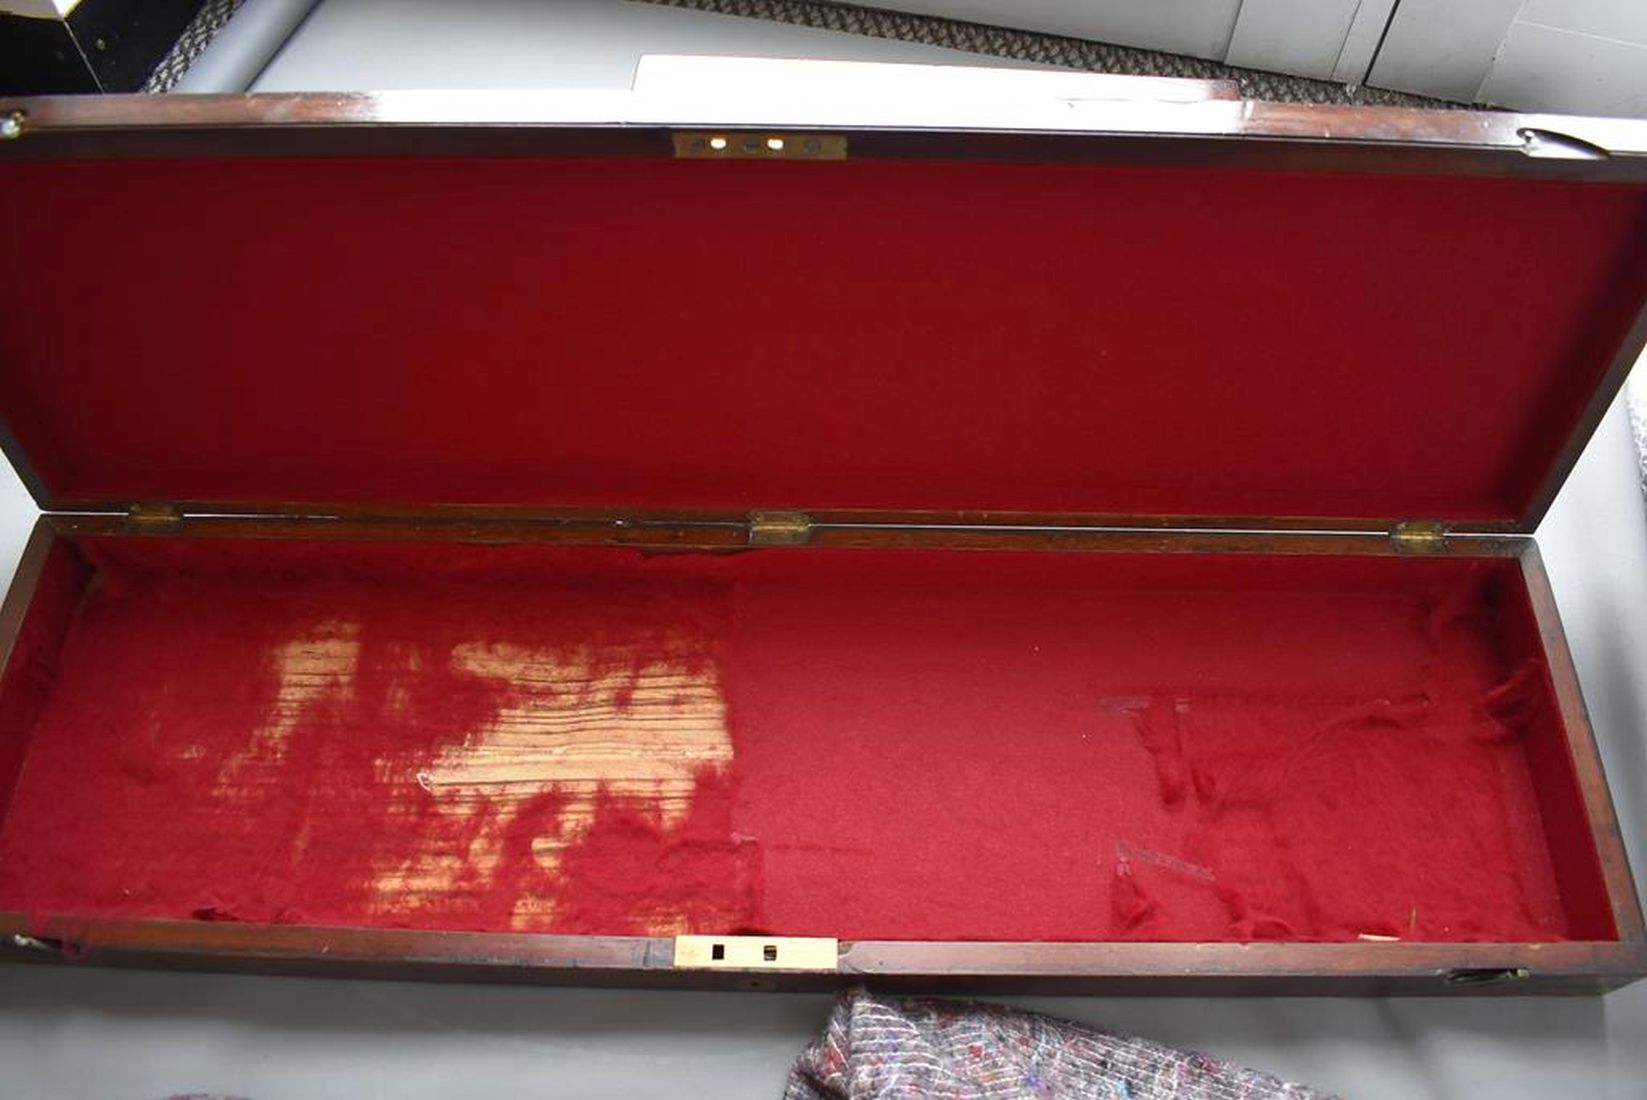 A BRASS BOUND MAHOGANY SPORTING GUN CASE, for a gun with 32inch barrels, red felt lining, partitions - Image 7 of 8